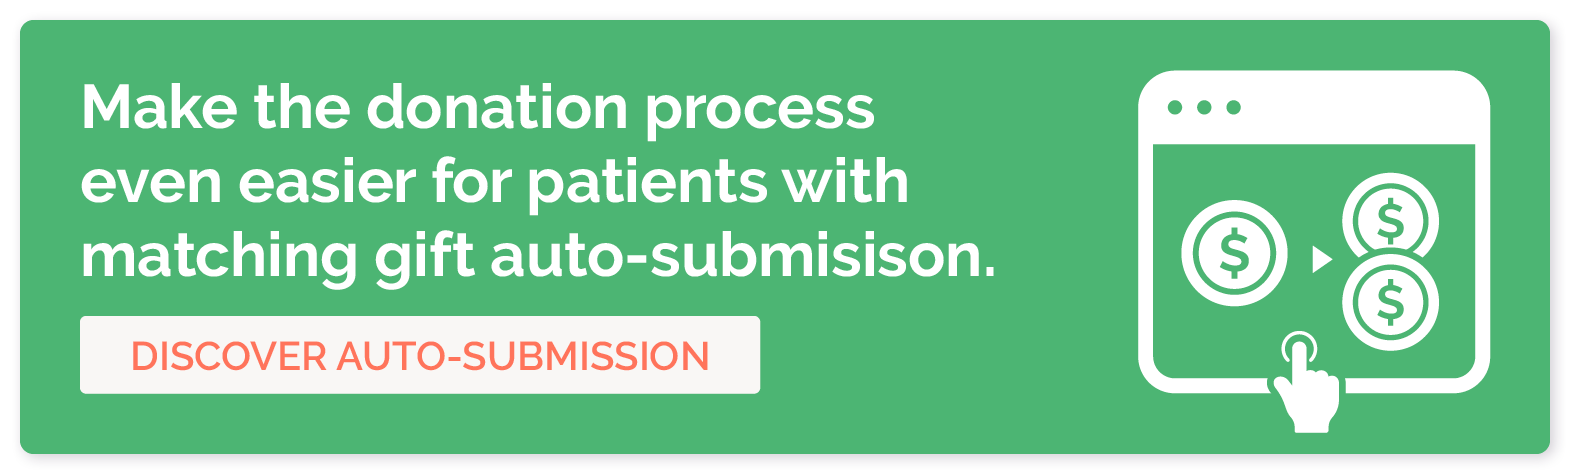 Make the donation process even easier for patients with matching gift auto-submission. Discover auto-submission. 